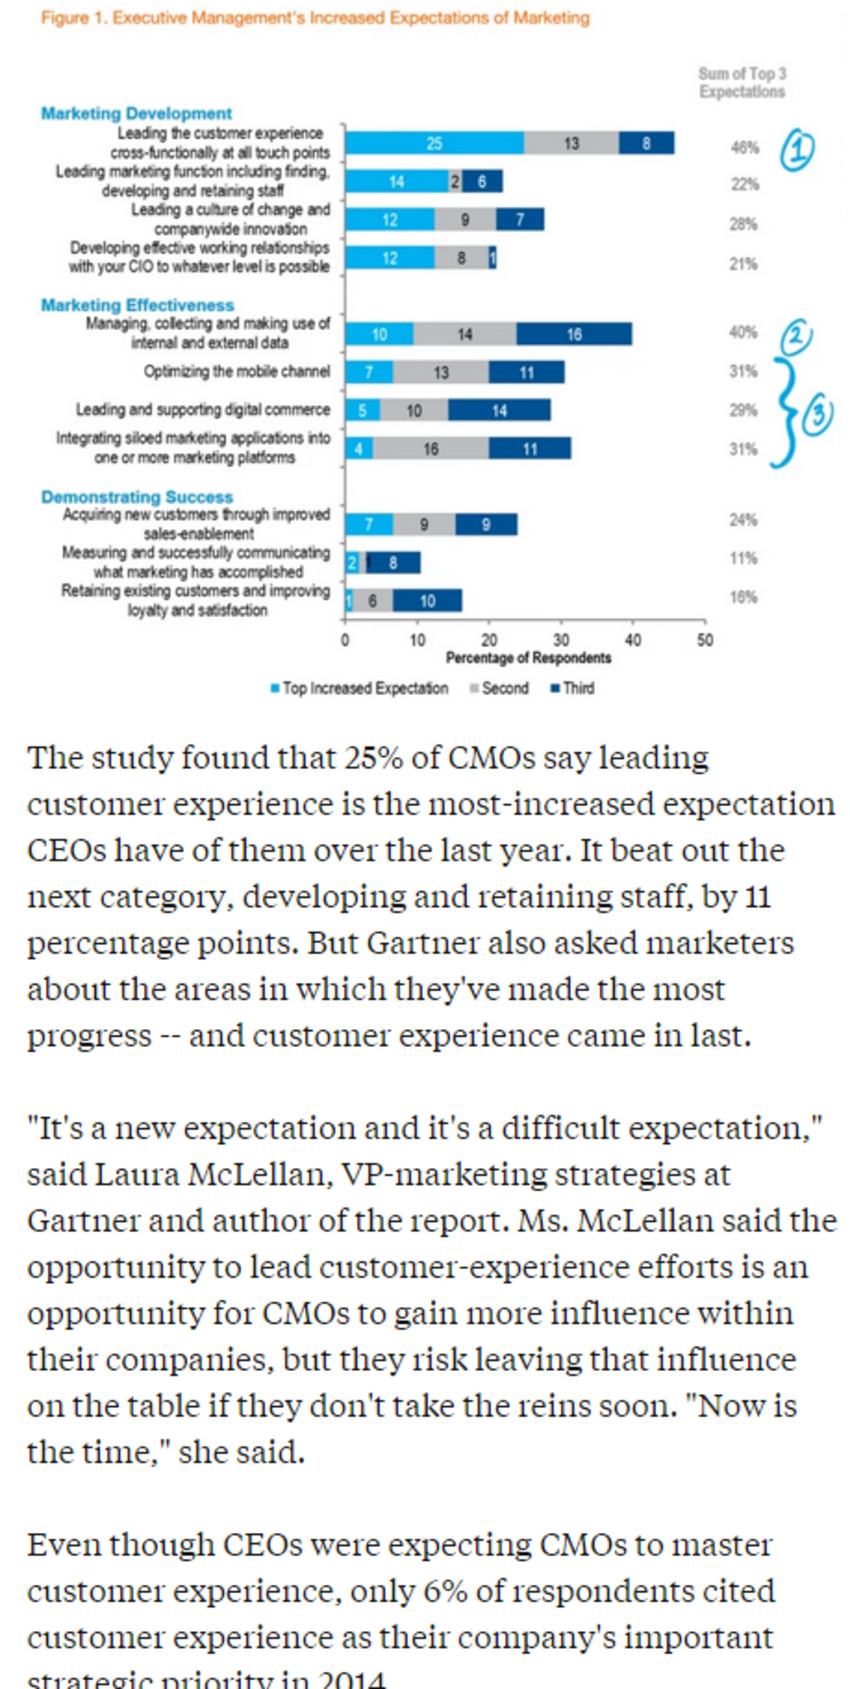 CMOs Pressed to Lead Customer Experience Efforts, But Their Progress Is Lacking - Ad Age | The MarTech Digest | Scoop.it